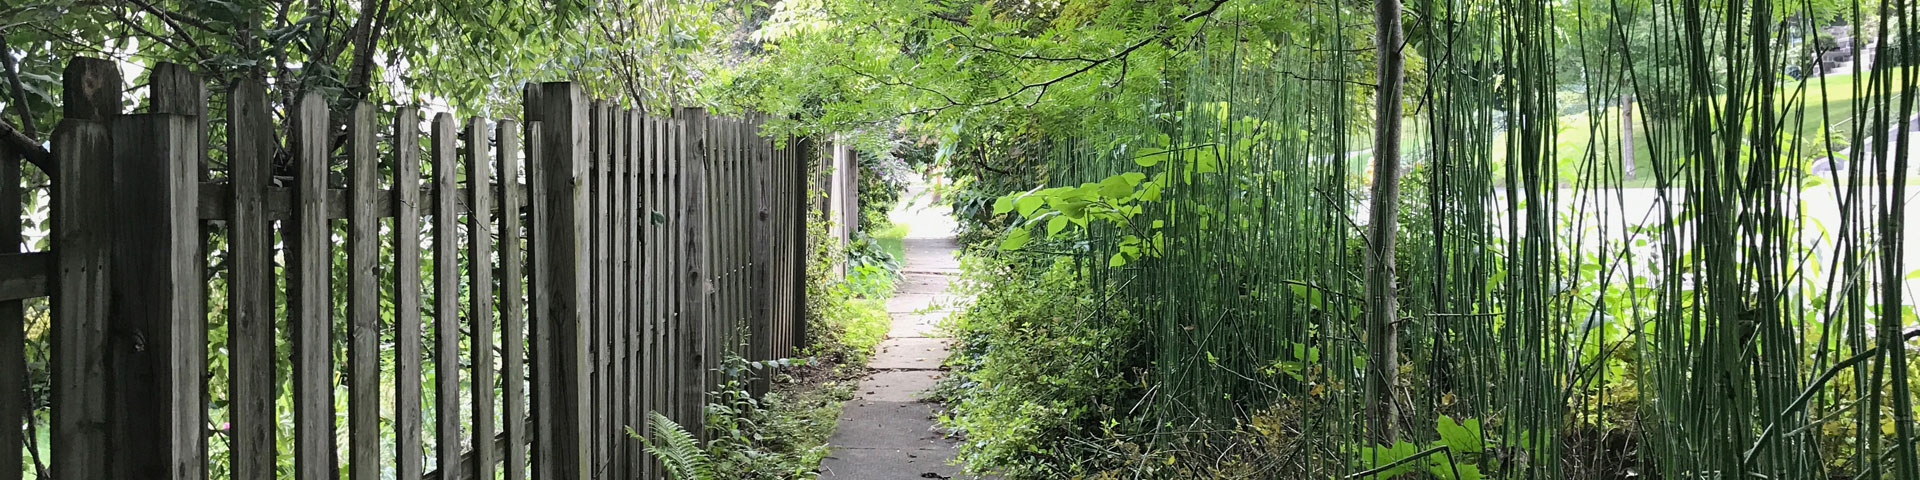 A straight sidewalk is bordered on the left by a fence and on the right by bamboo and other greenery.